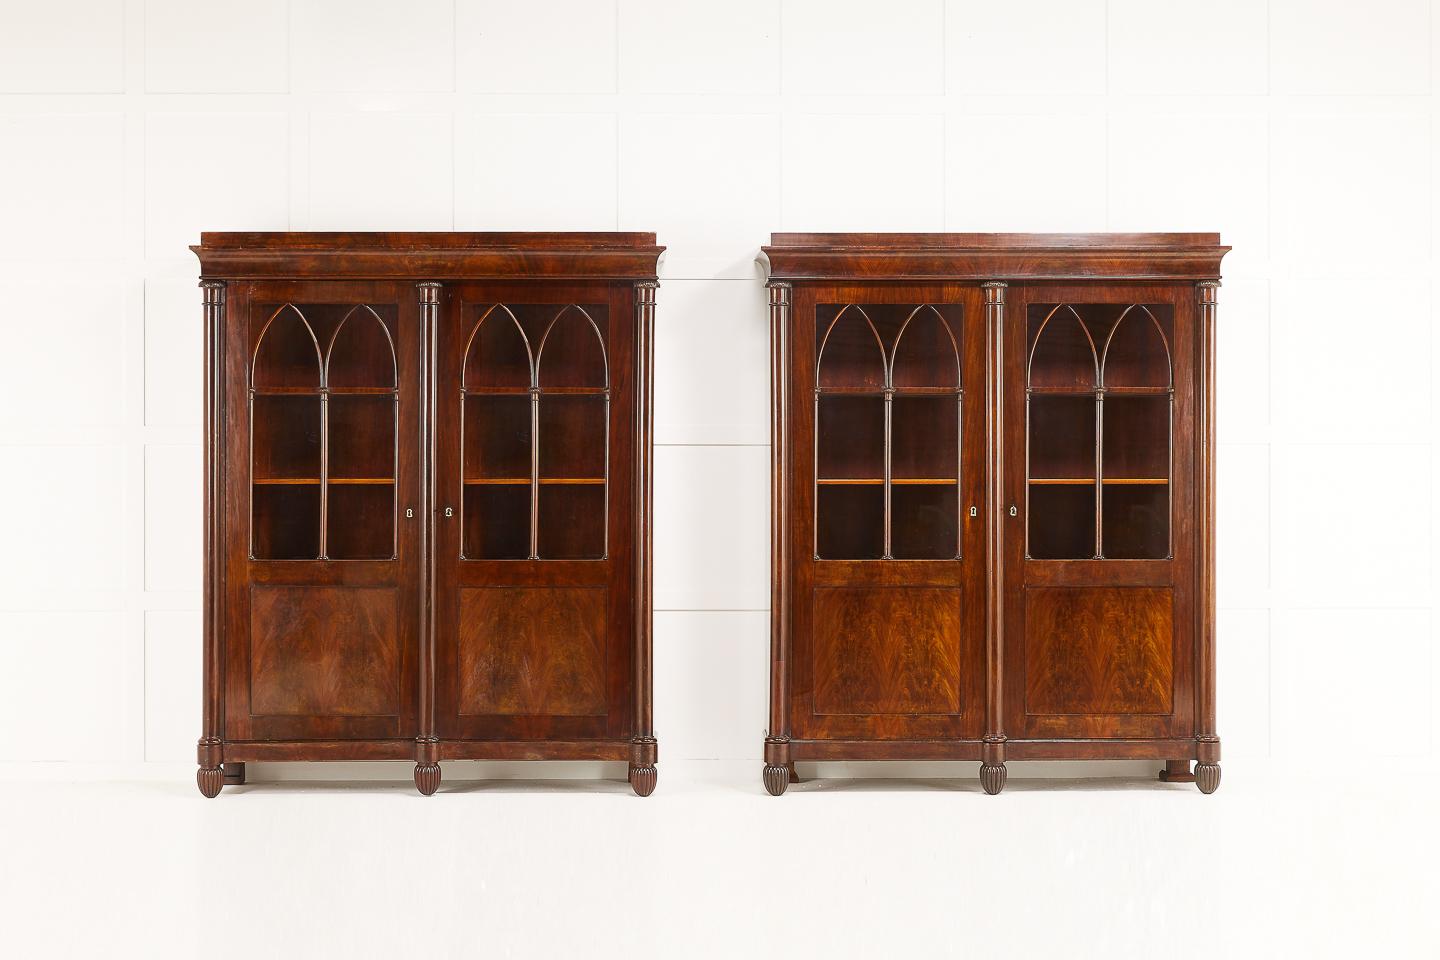 Pair of quality early 19th century French empire period bookcases in beautiful flamed mahogany. Doors with original old glass with nice fine carvings and two arched glazed bookcase doors.